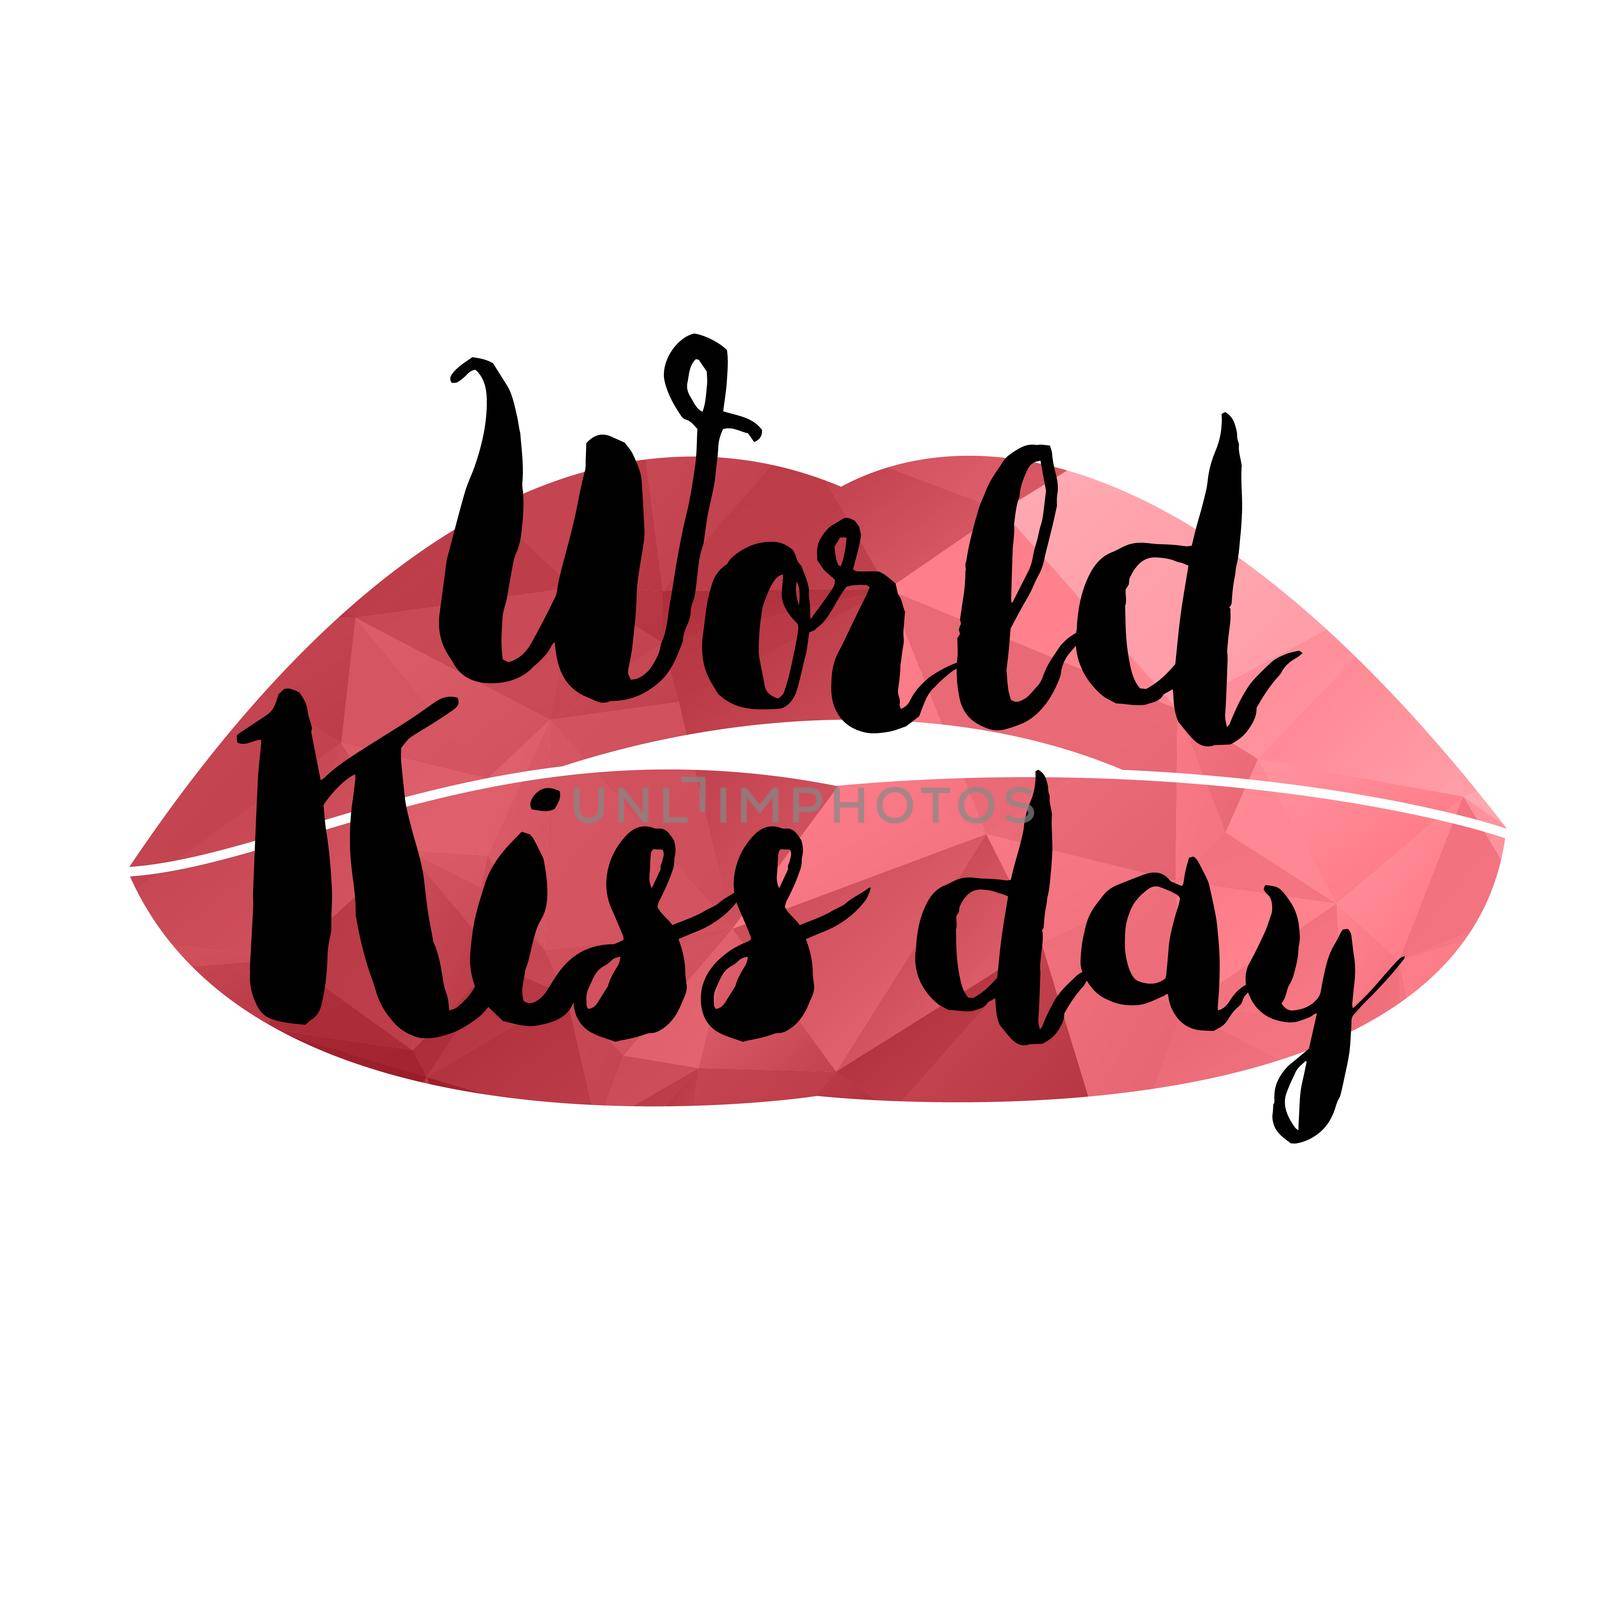 World Kiss Day Promotion Banner With Lips. Vector